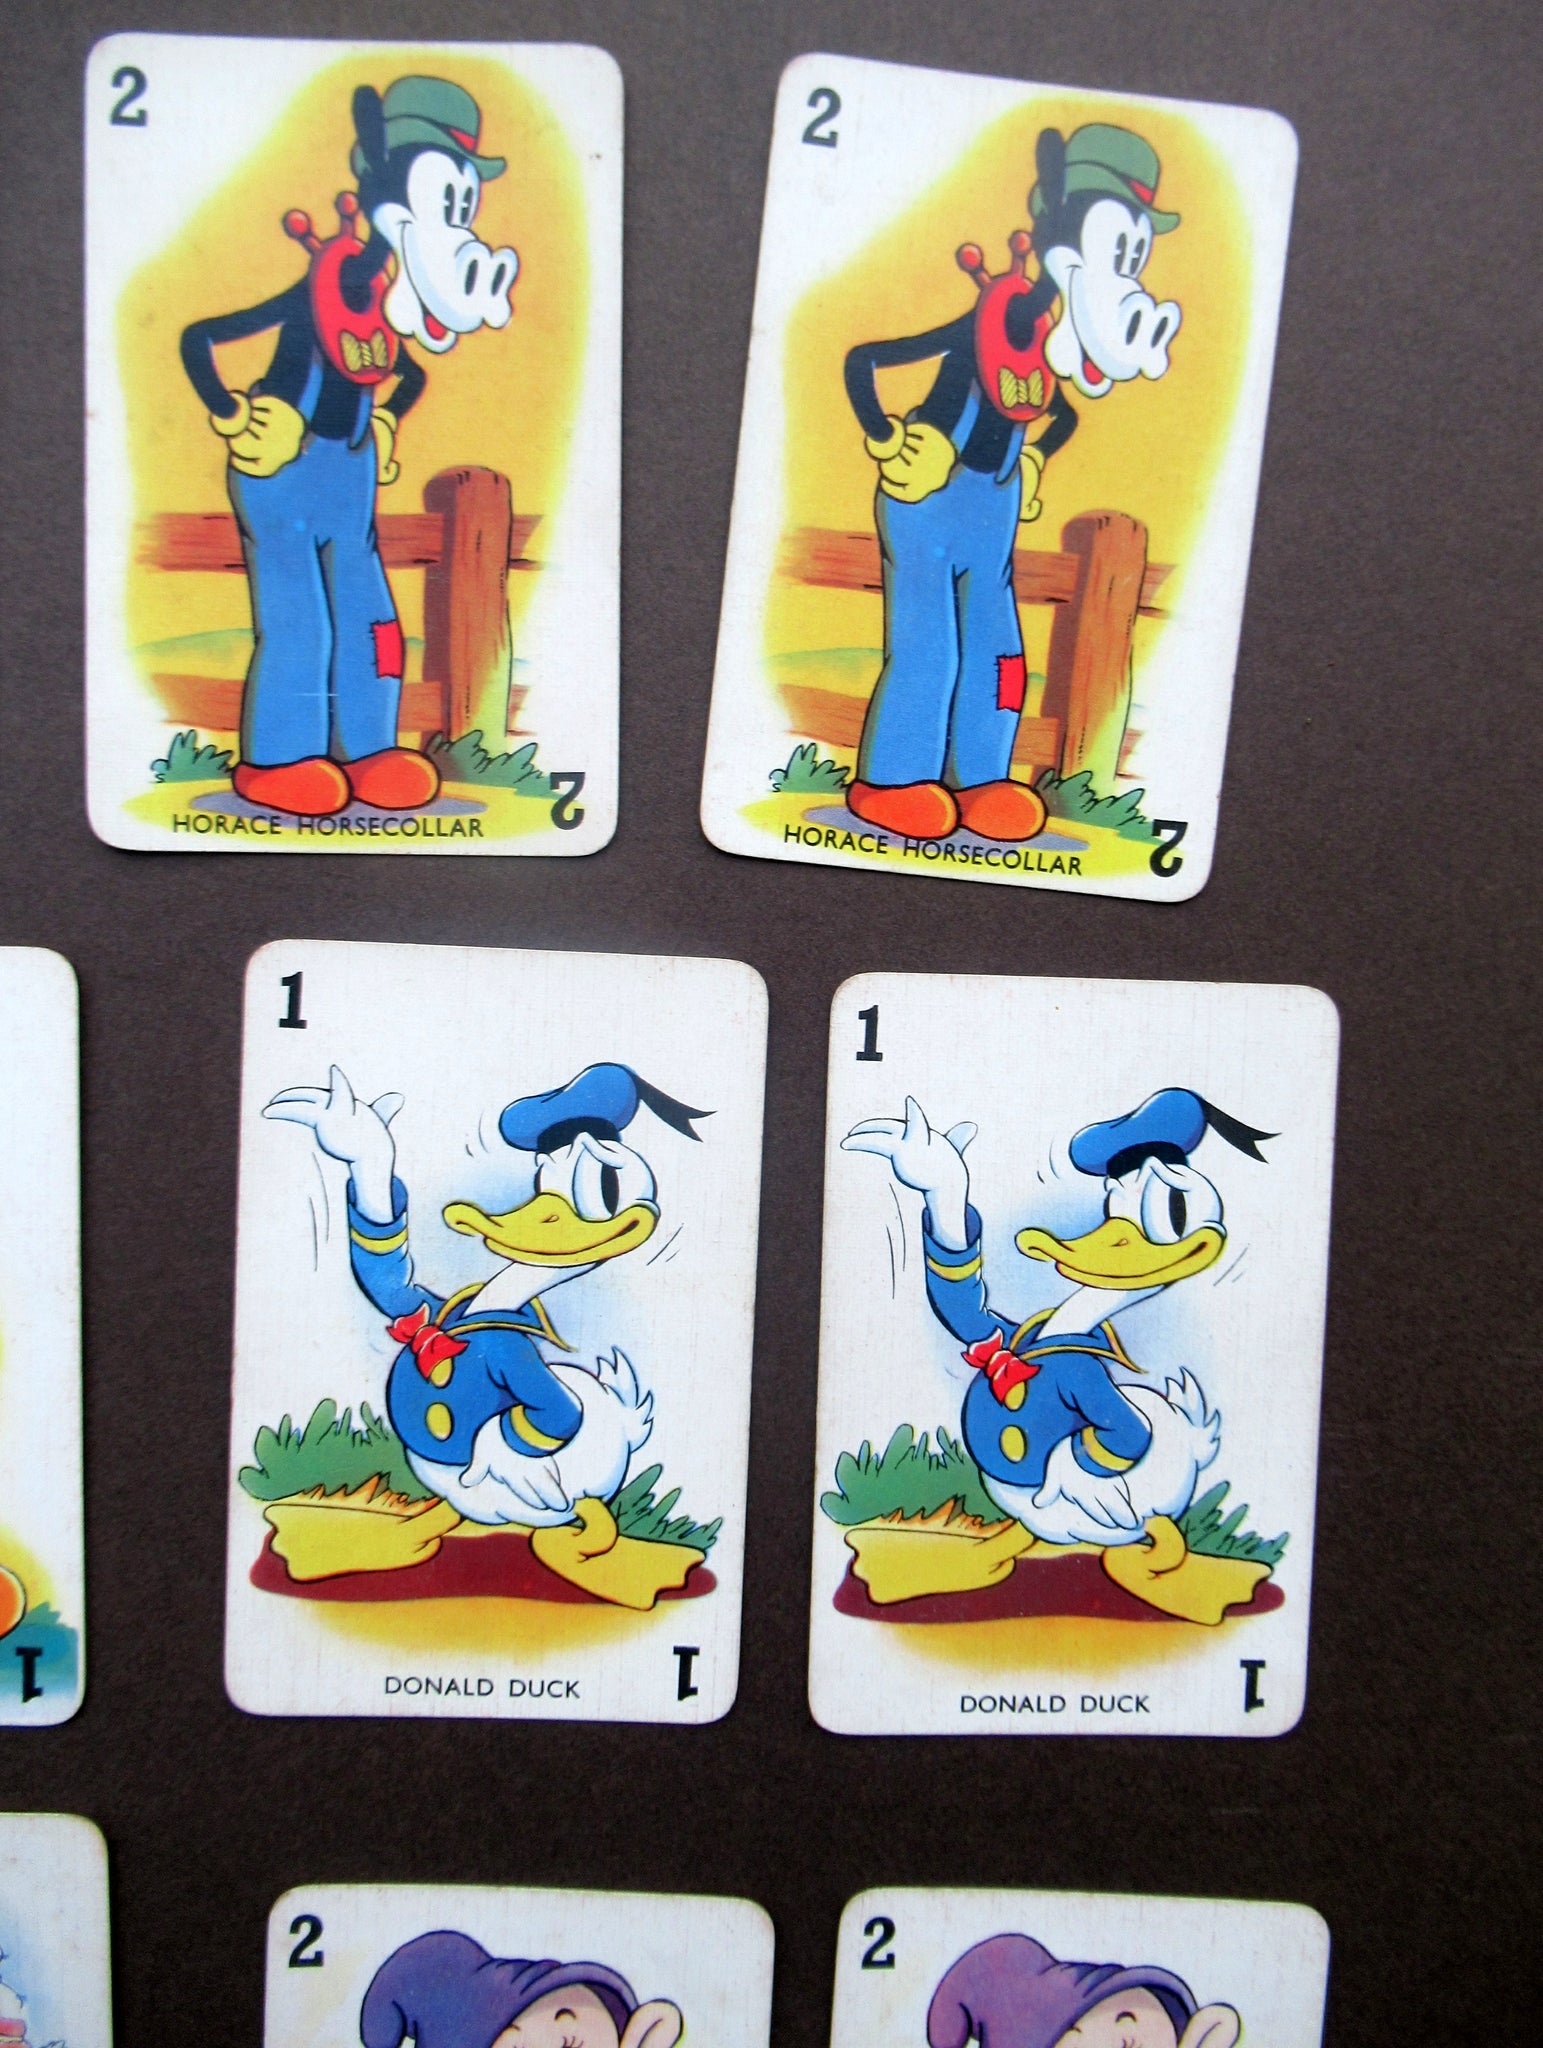 Pato Donald — The World of Playing Cards